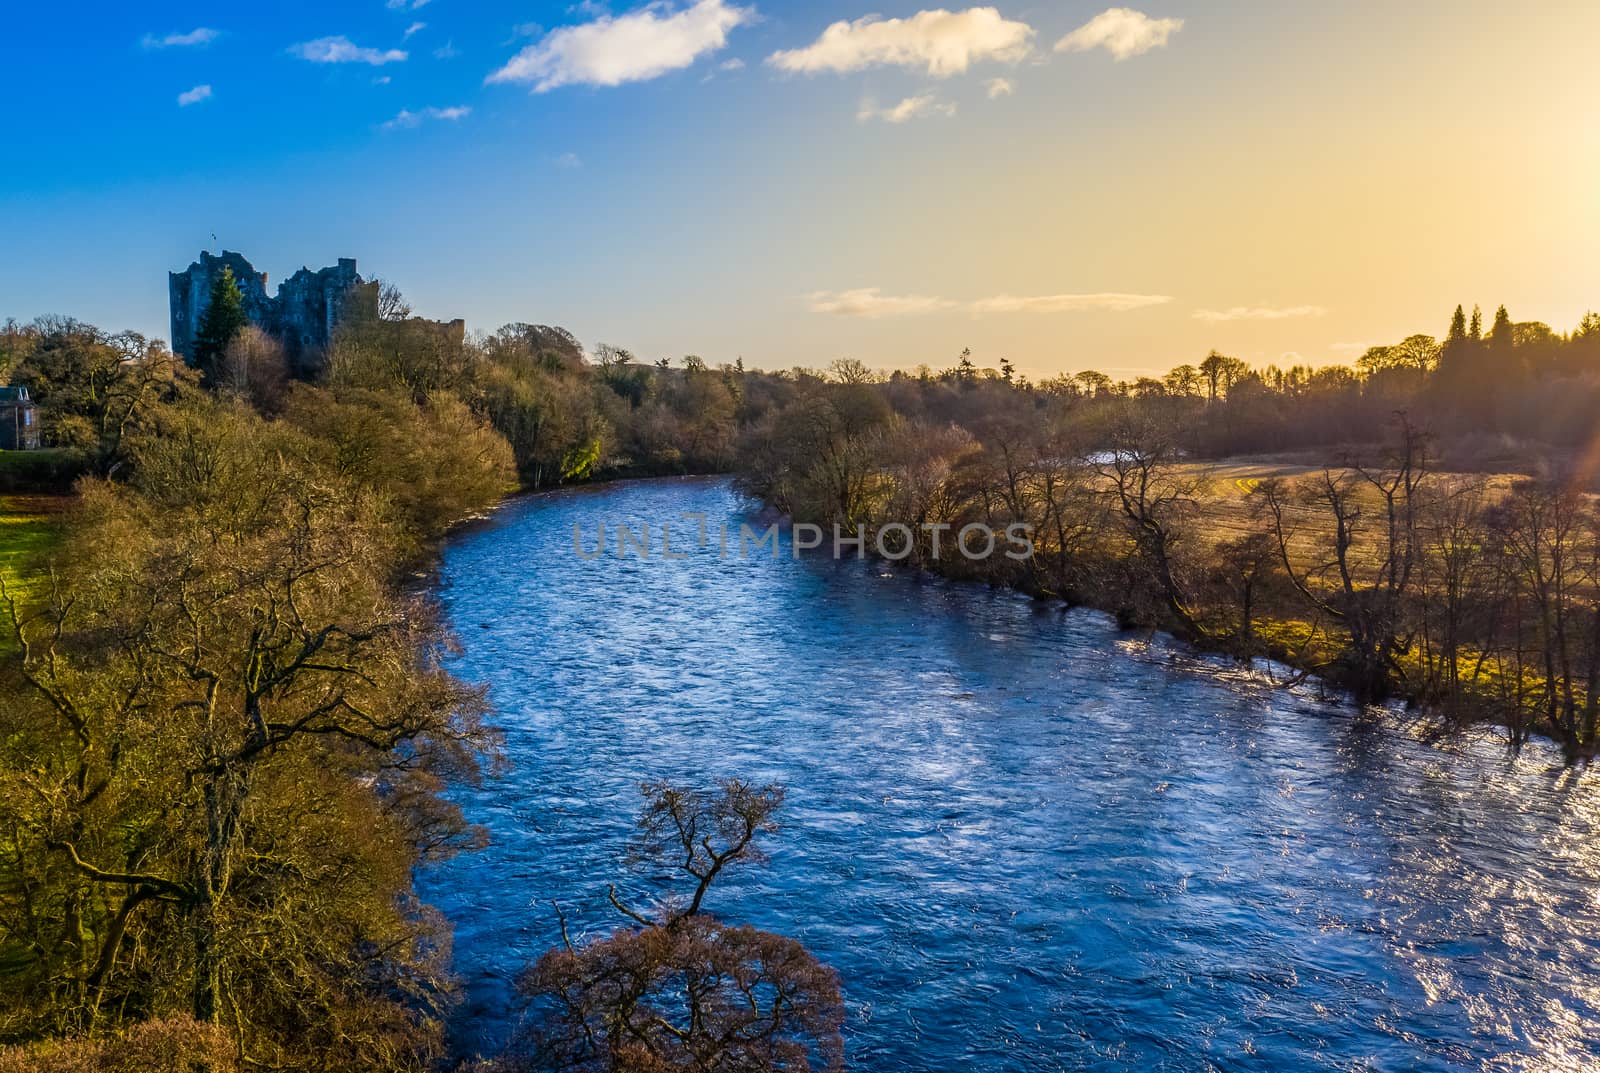 A River And Castle In Scotland In The Beautiful Morning Light